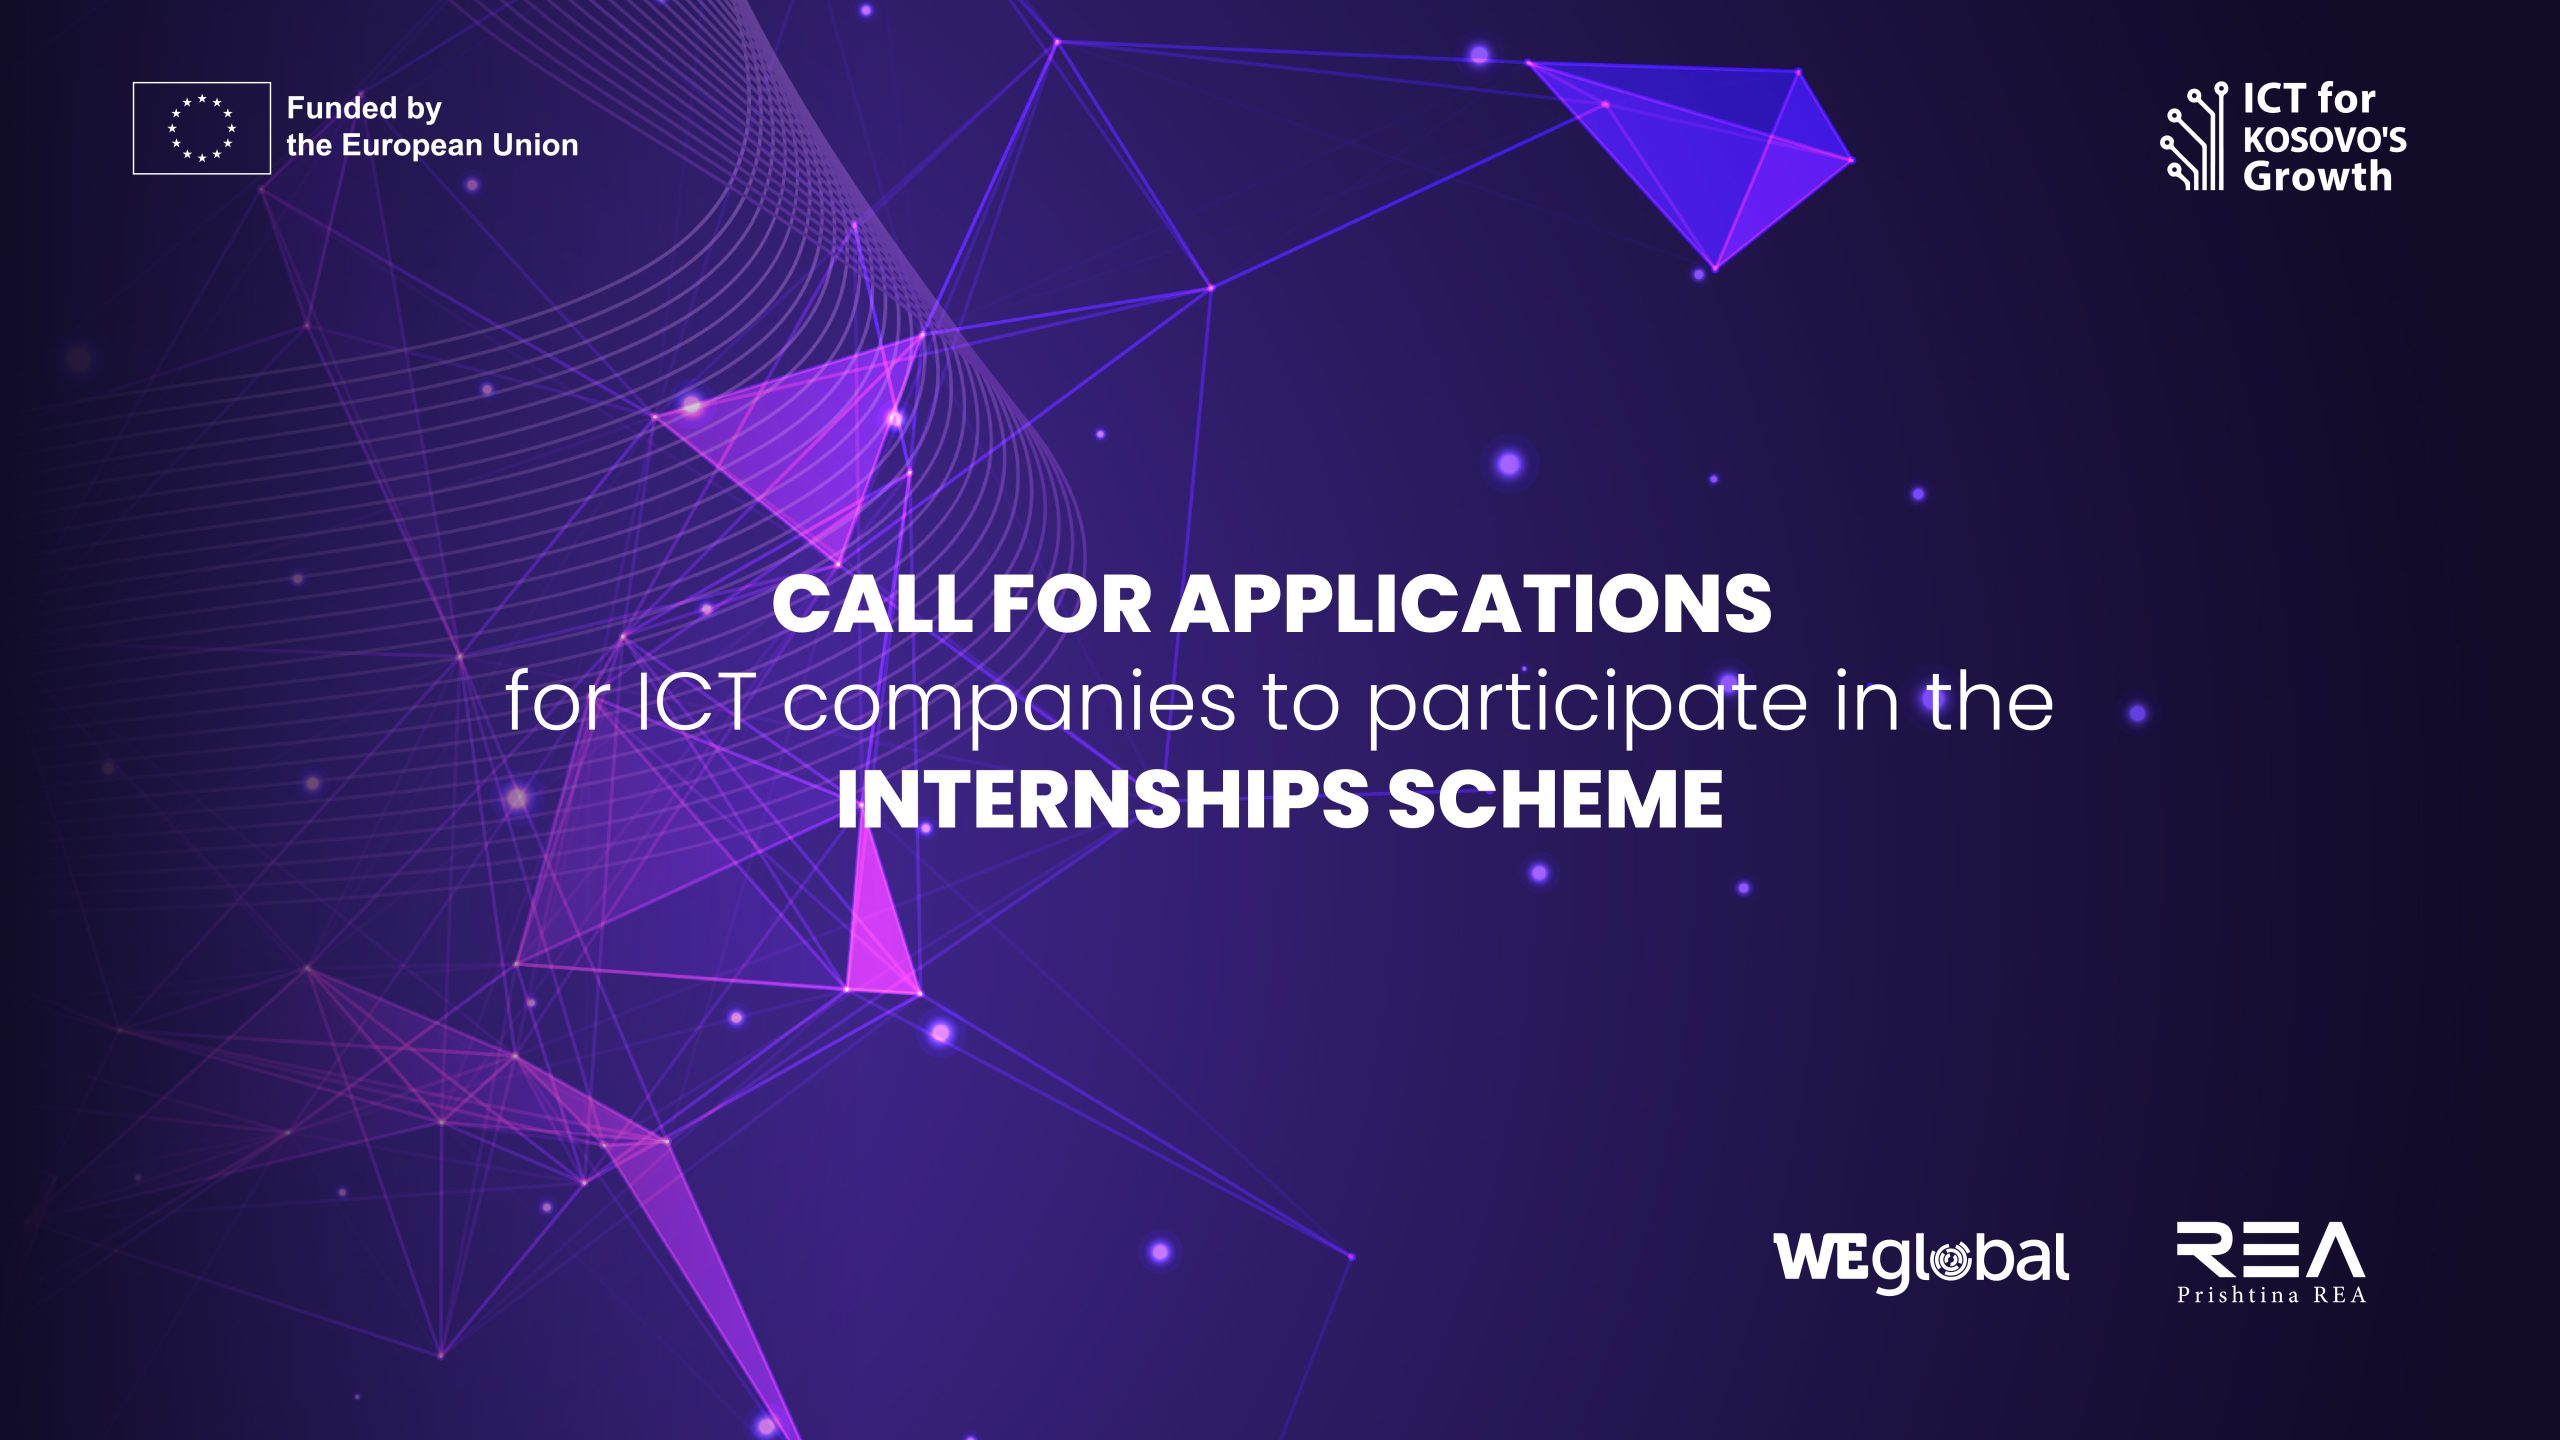 Call for Applications for ICT companies to participate in the Internships Scheme